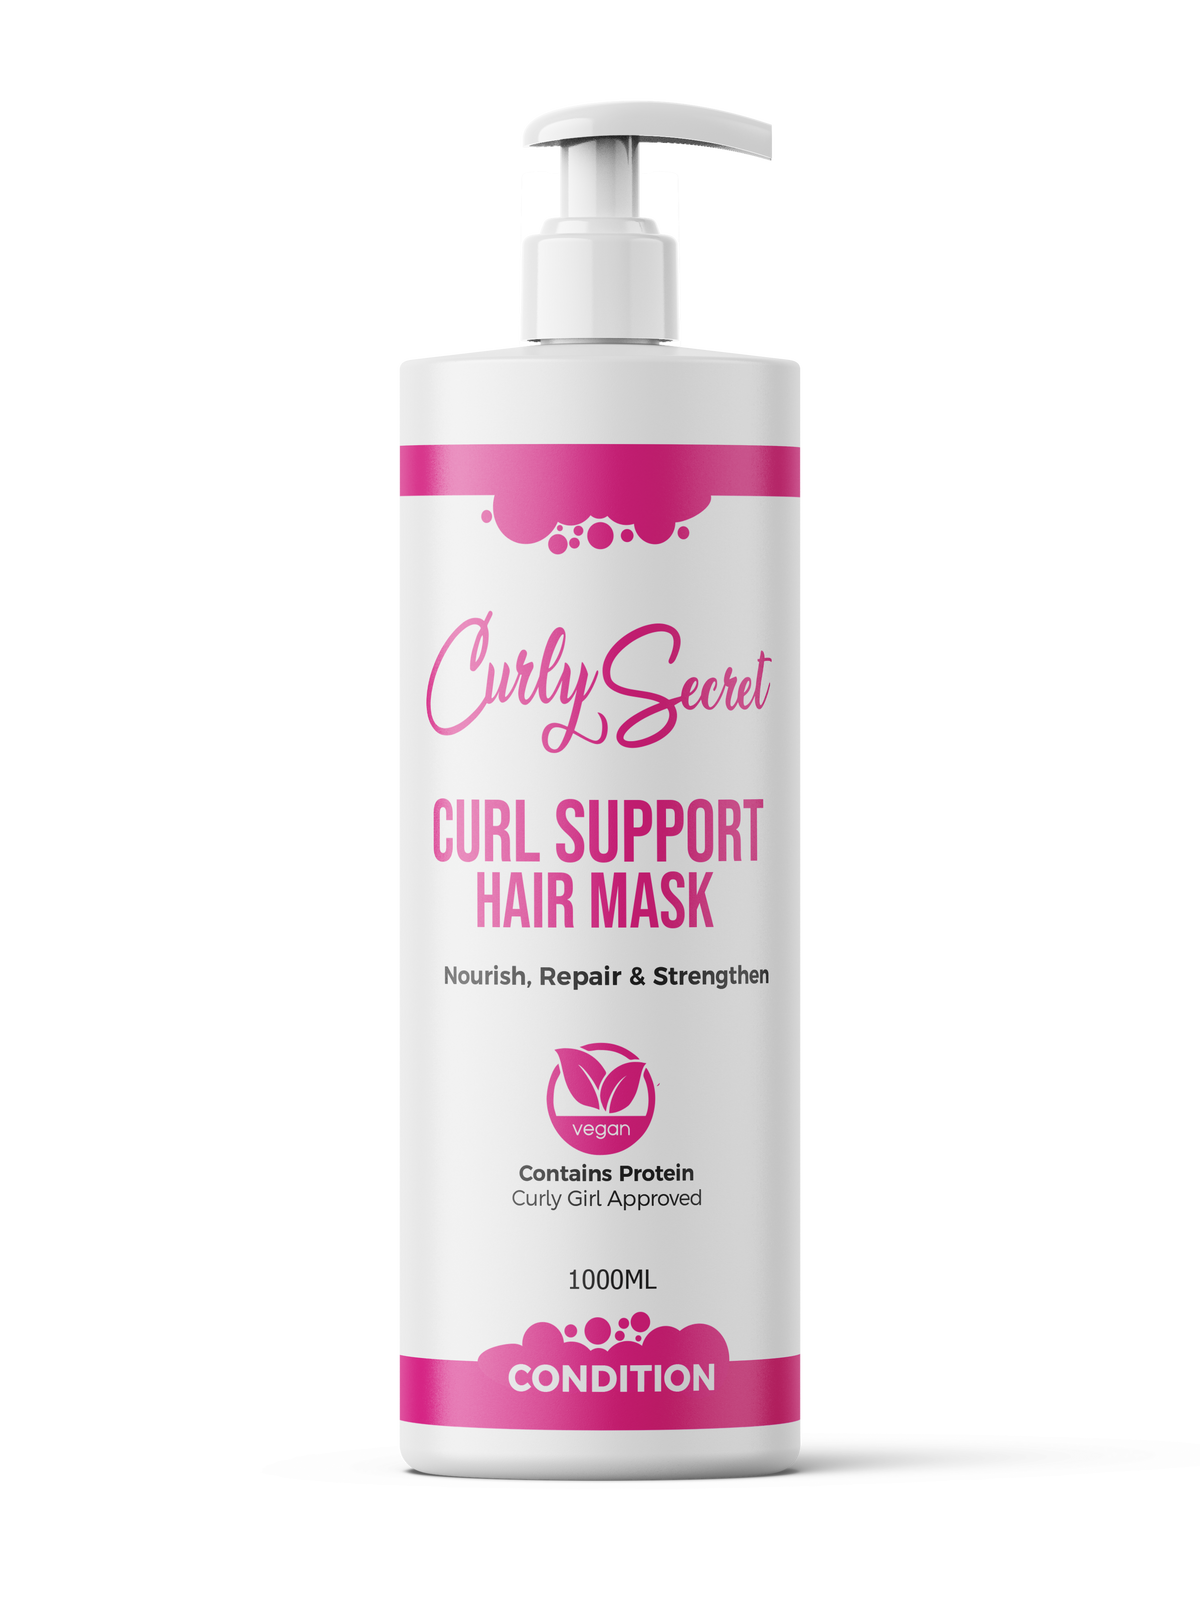 Curl Support Hair Mask